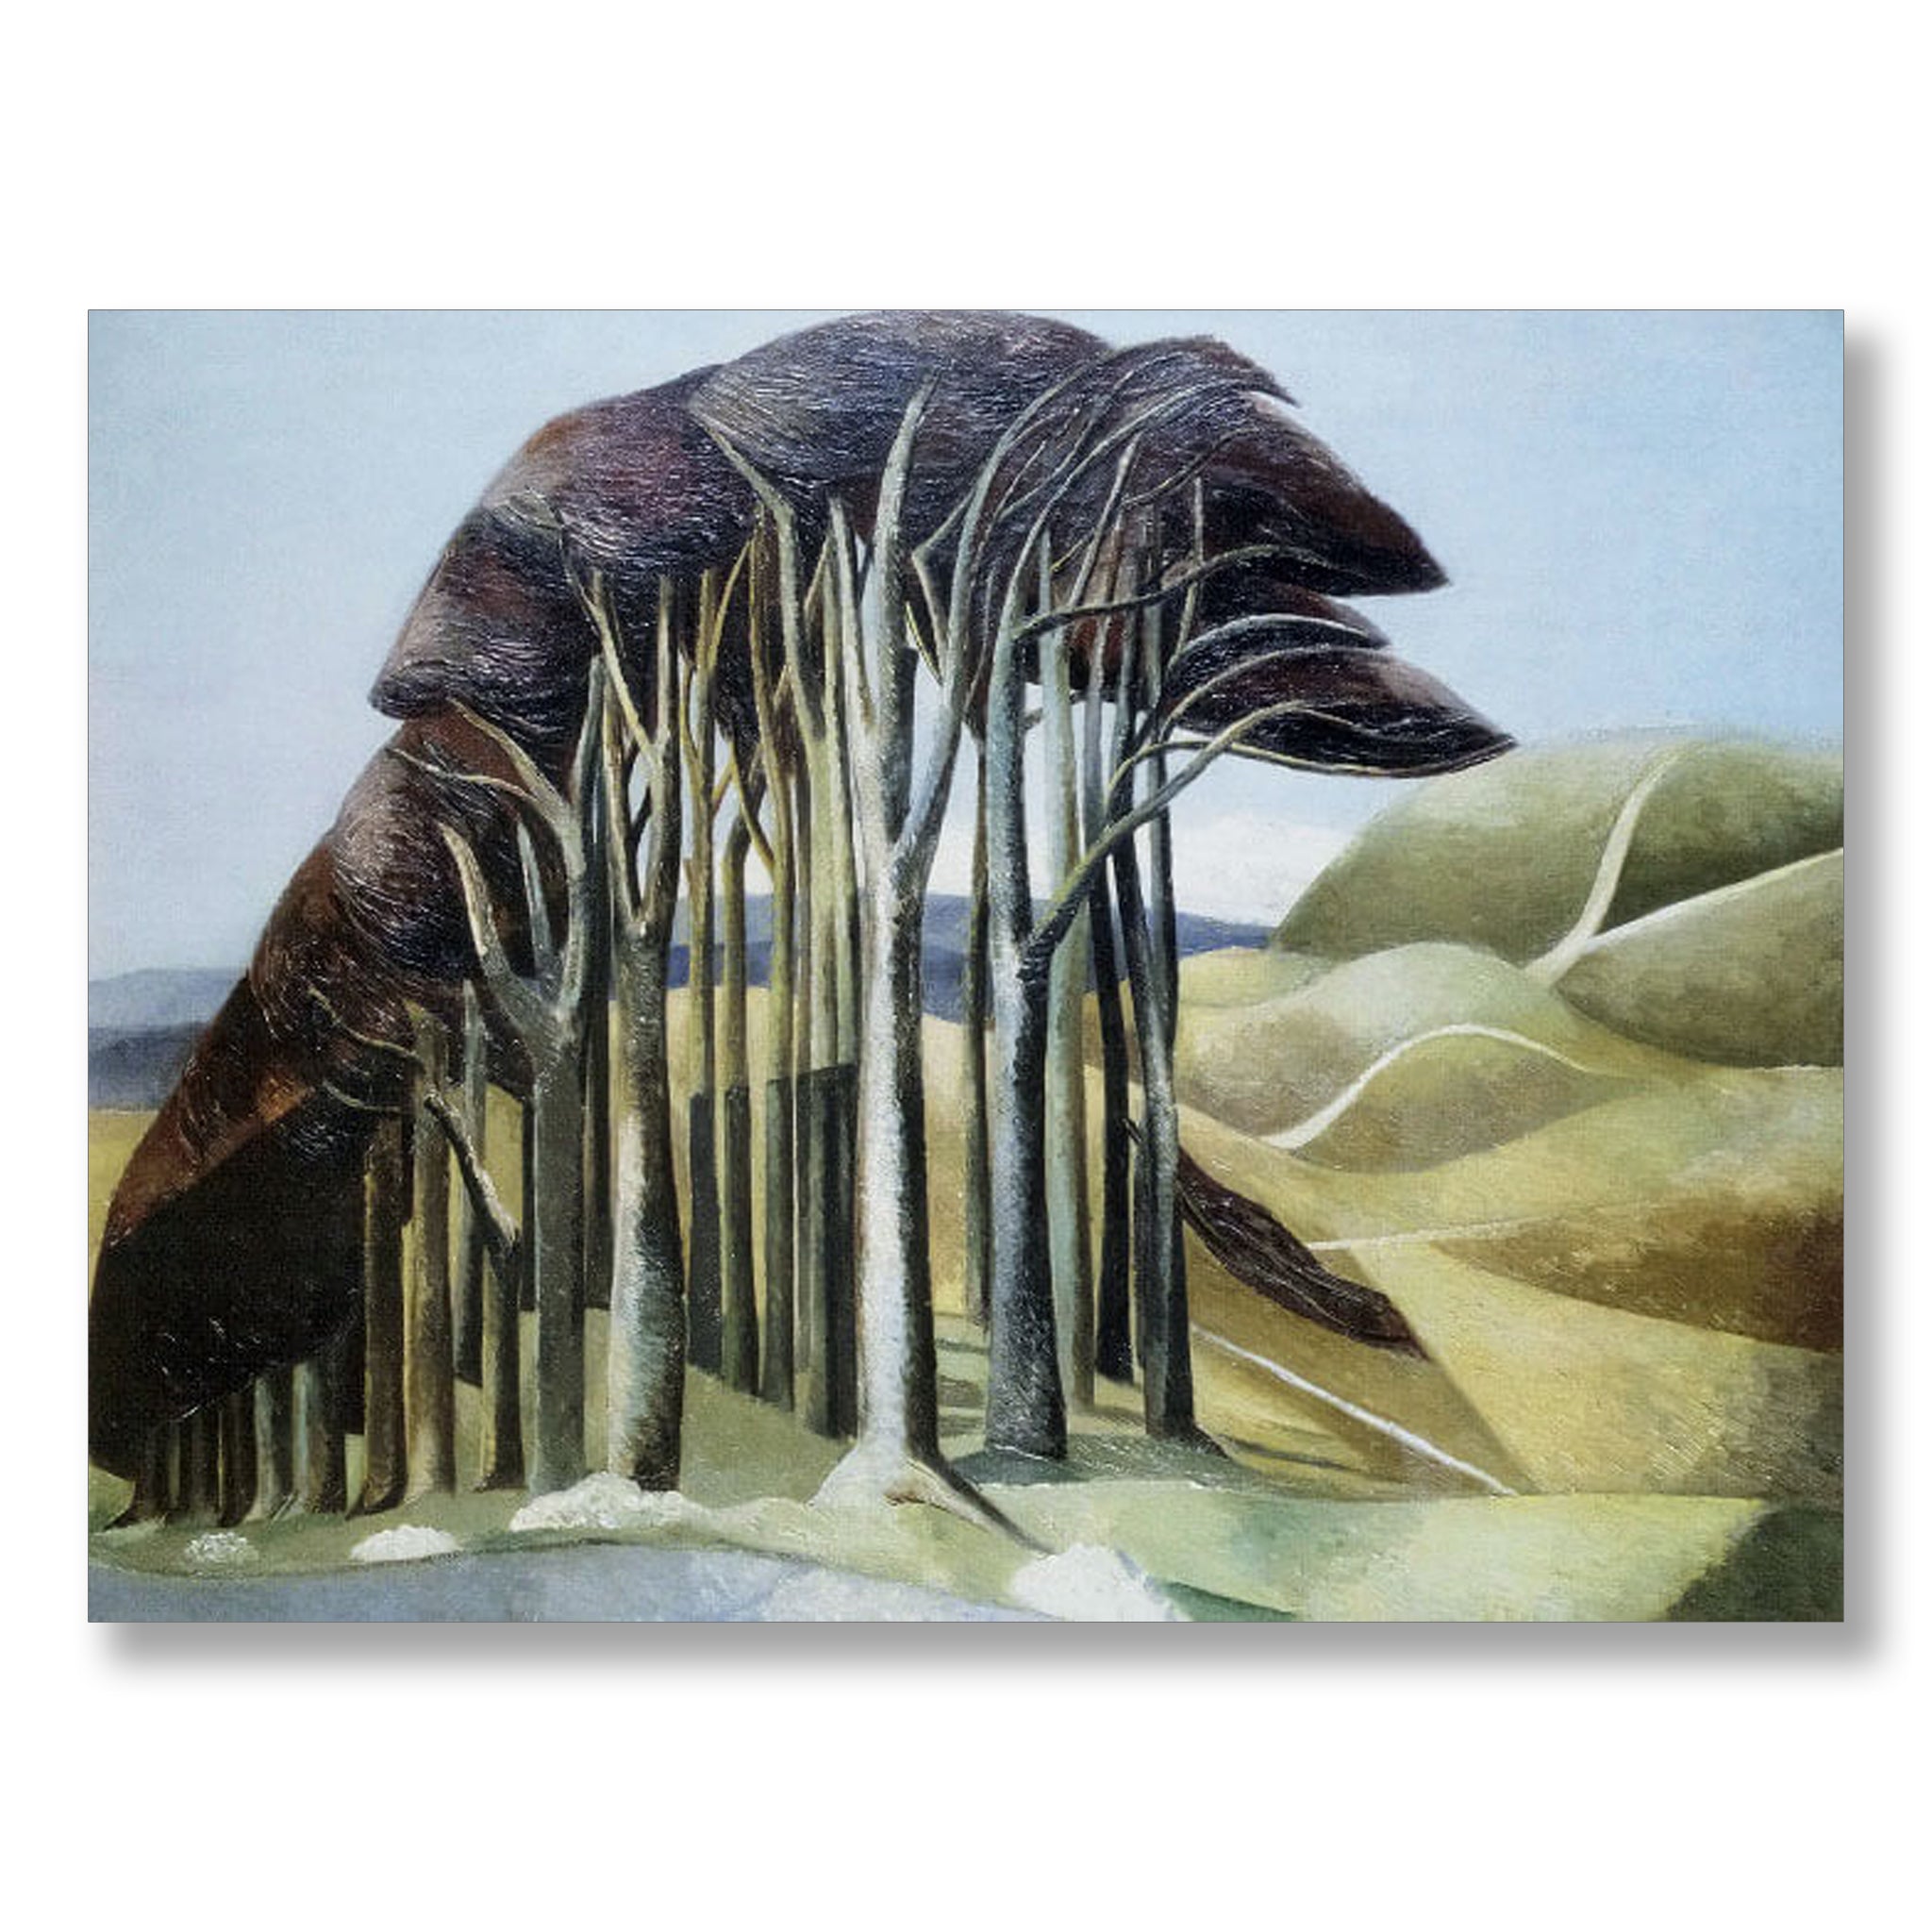 Wood on the Downs by Paul Nash